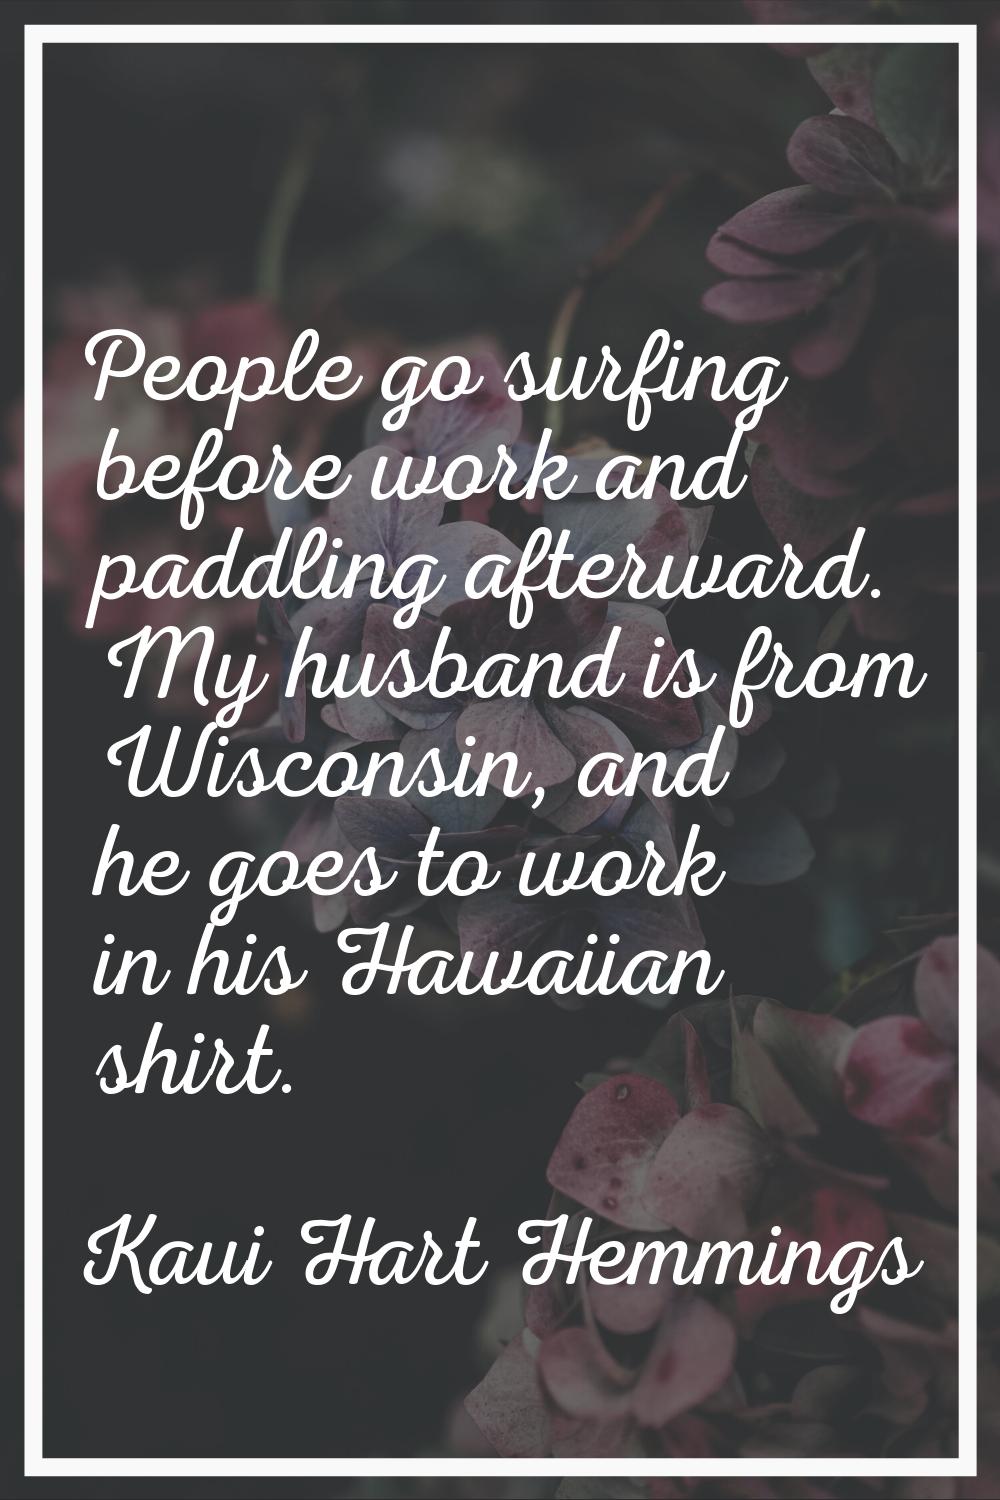 People go surfing before work and paddling afterward. My husband is from Wisconsin, and he goes to 